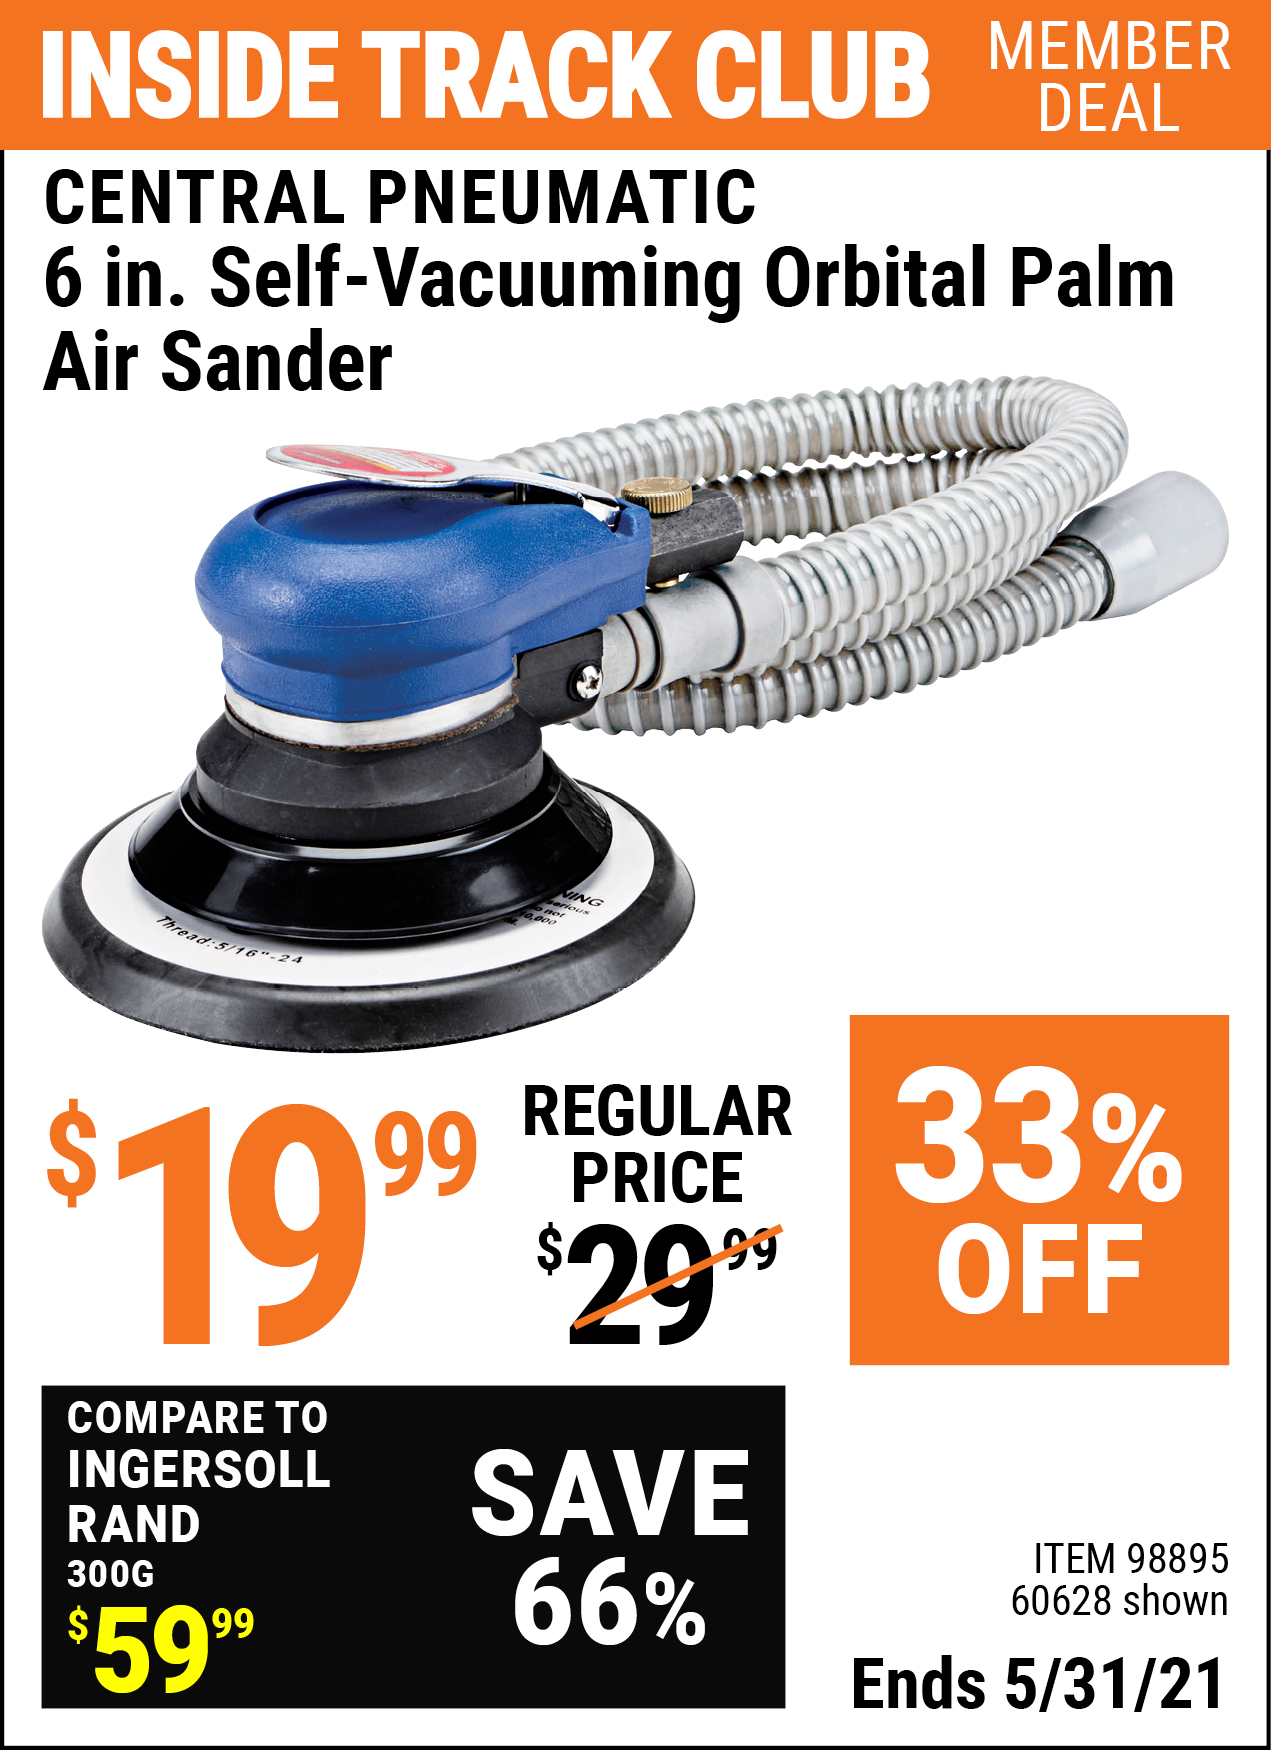 Inside Track Club members can buy the CENTRAL PNEUMATIC 6 in. Self-Vacuuming Orbital Palm Air Sander (Item 60628/98895) for $19.99, valid through 5/31/2021.